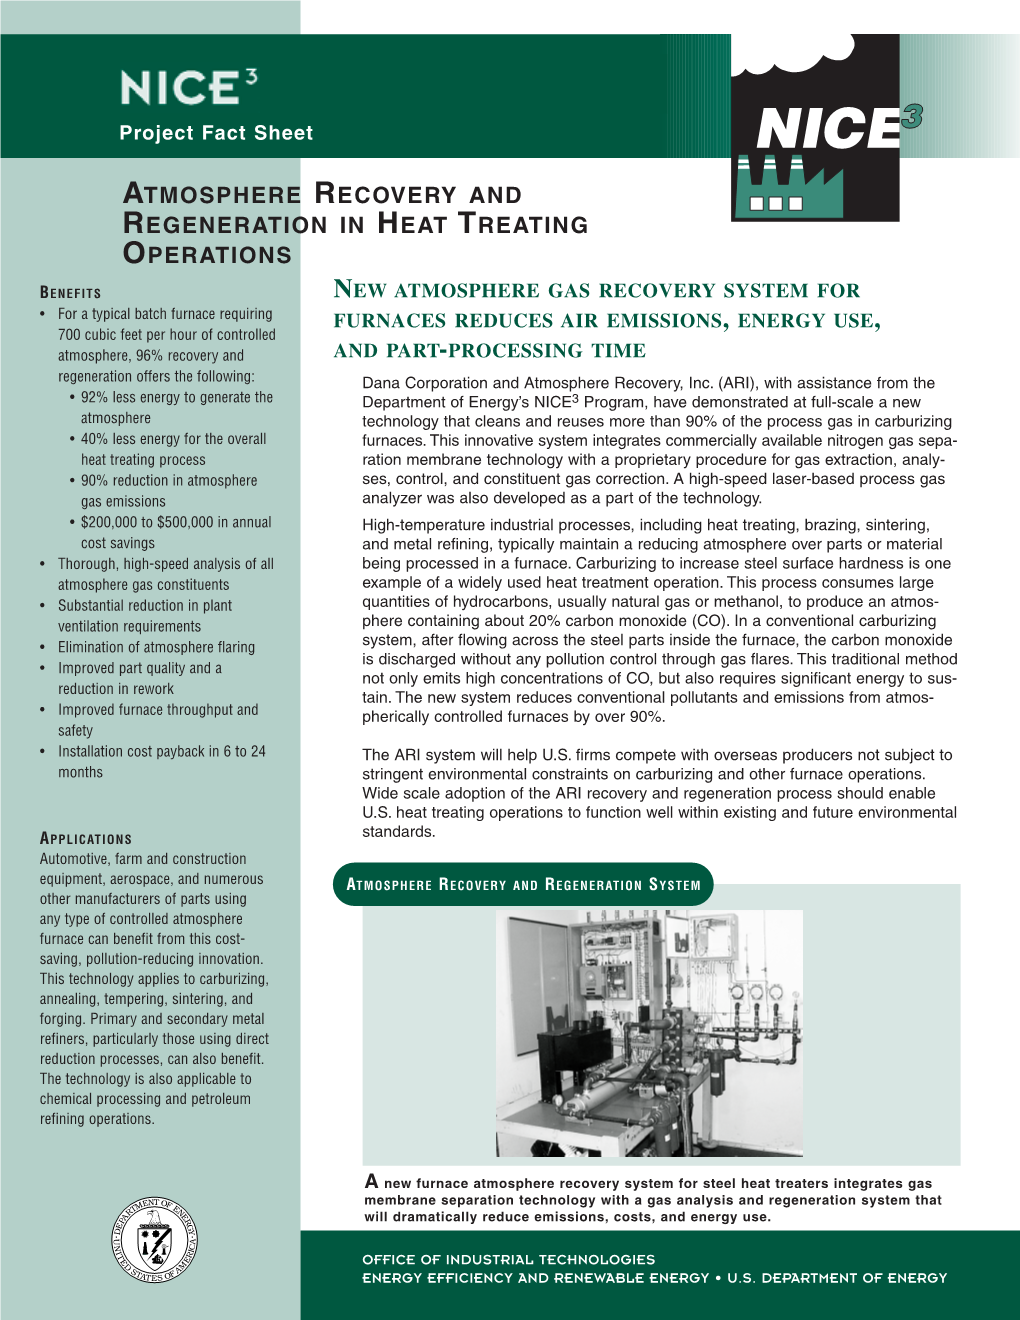 Atmosphere Recovery and Regeneration in Heat Treating Operations